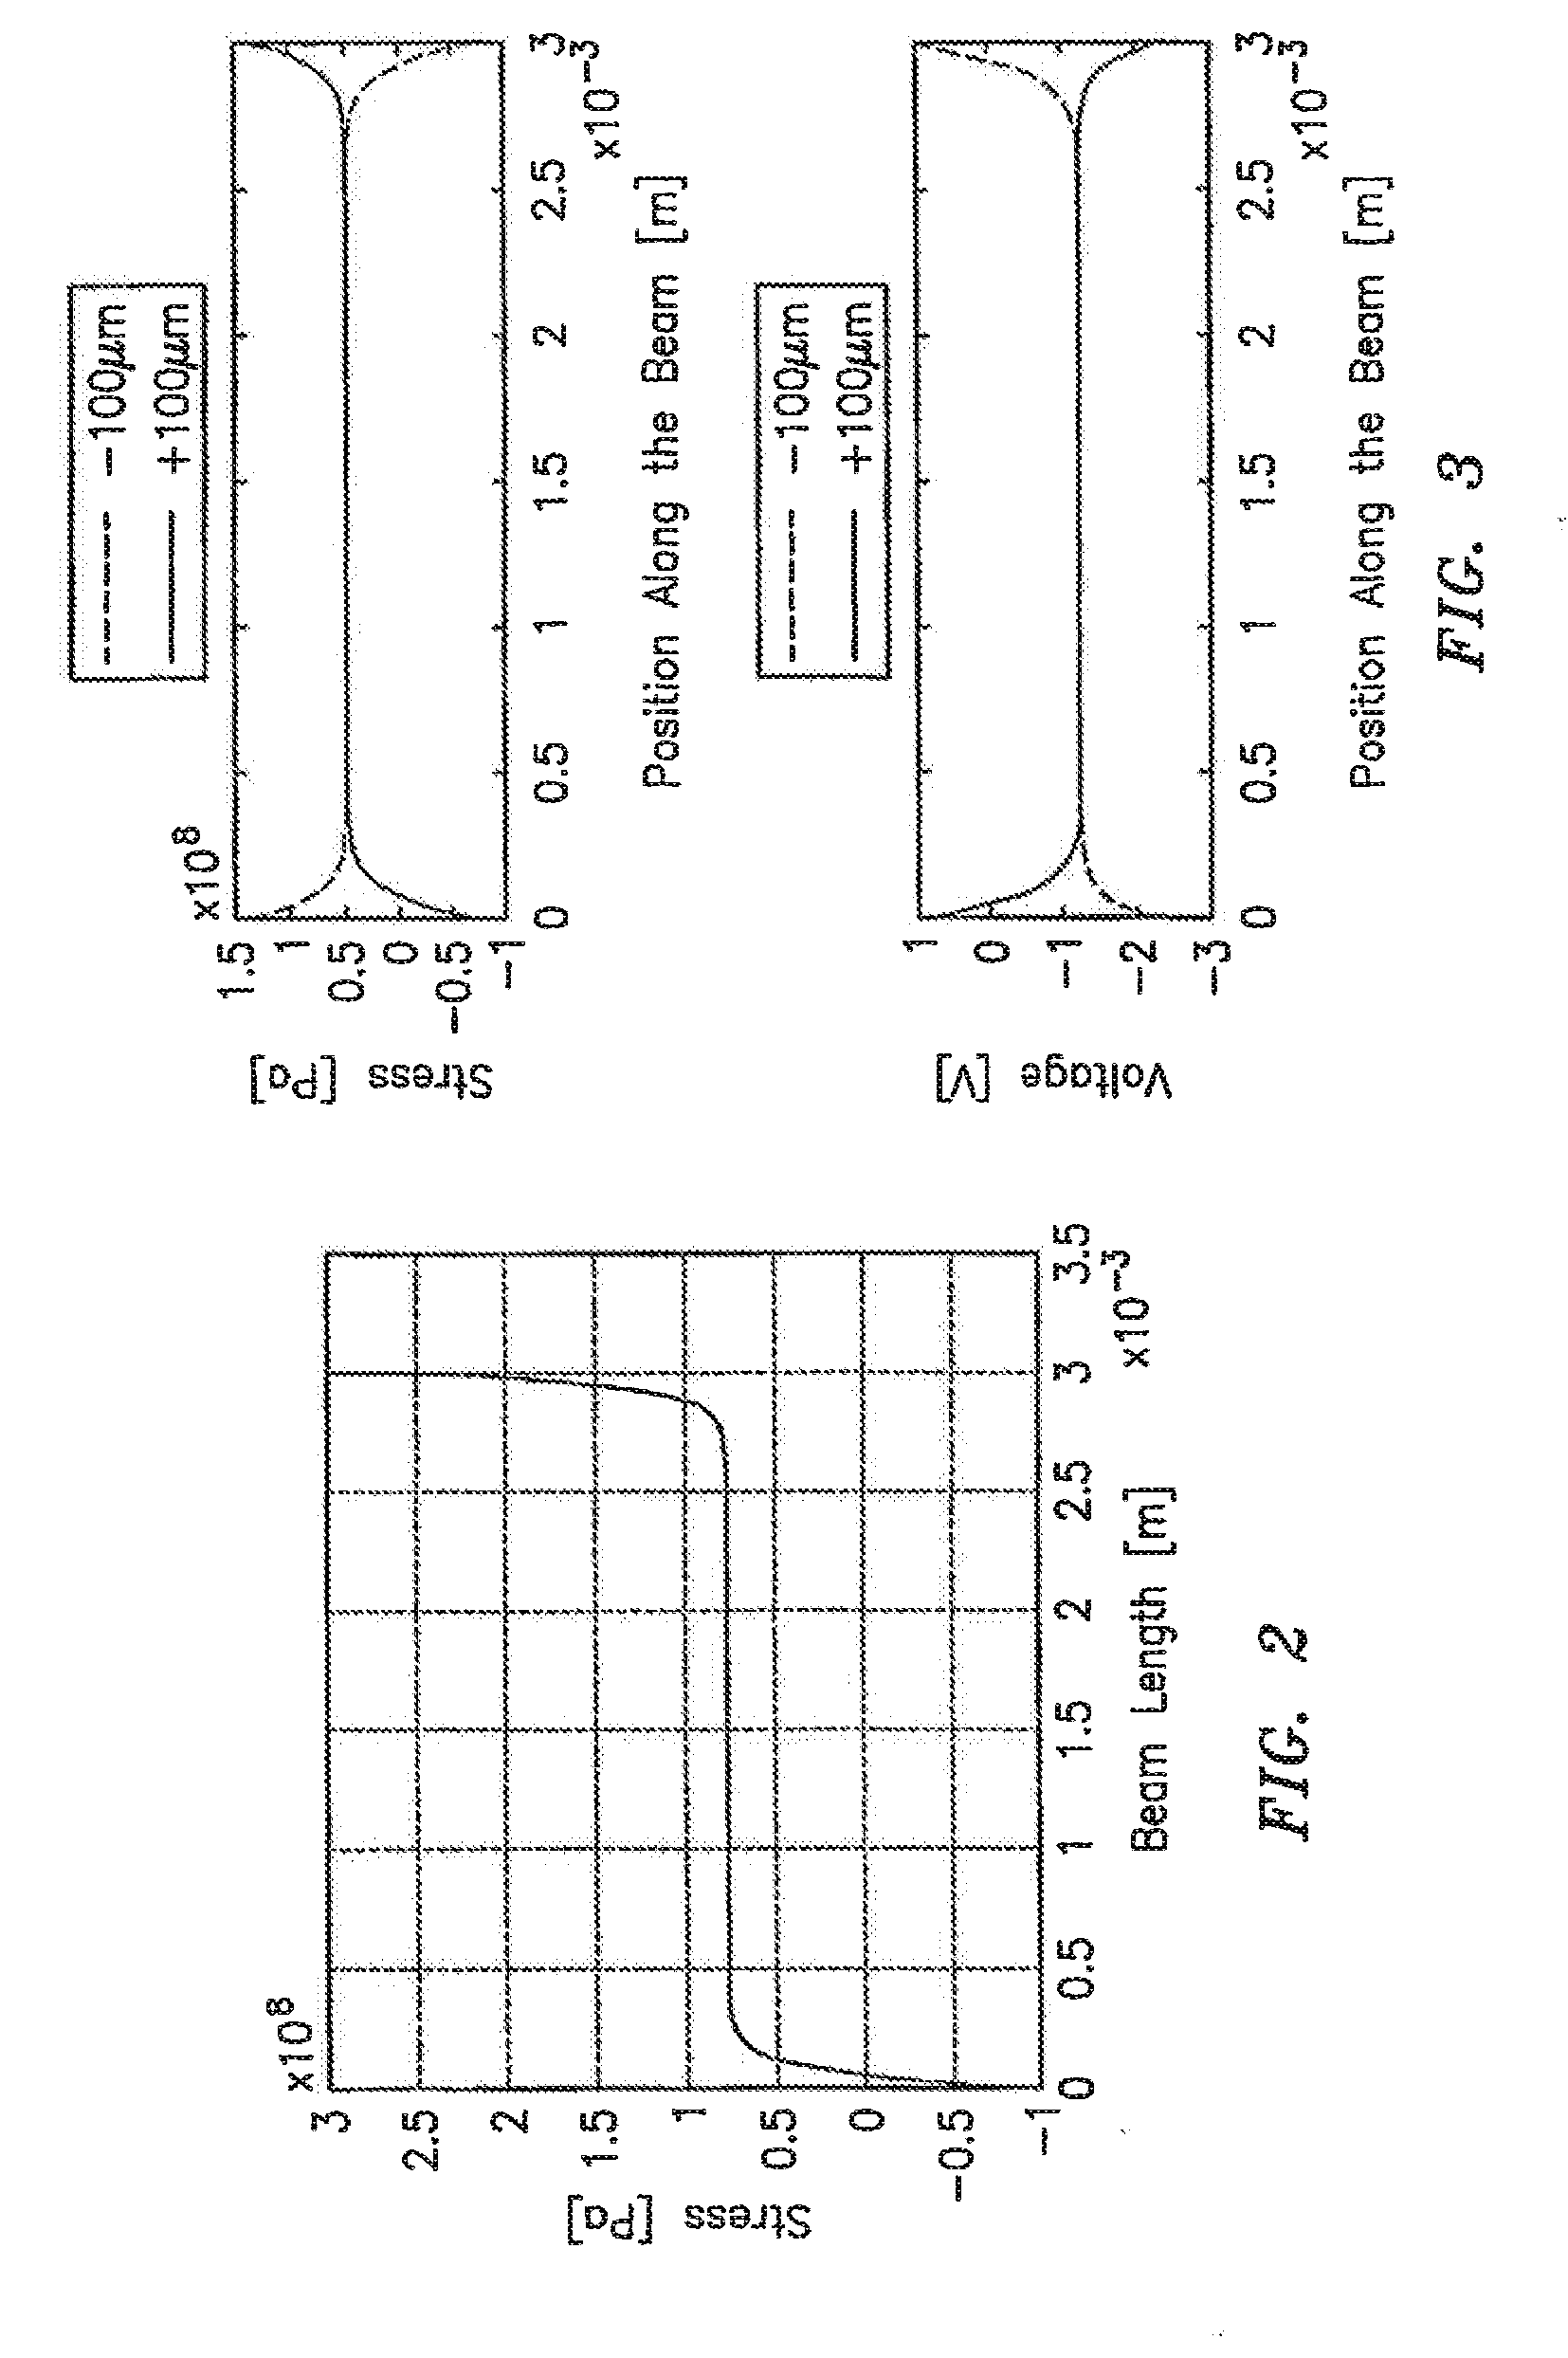 Power Harvesting Scheme Based on Piezoelectricity and Nonlinear Deflections